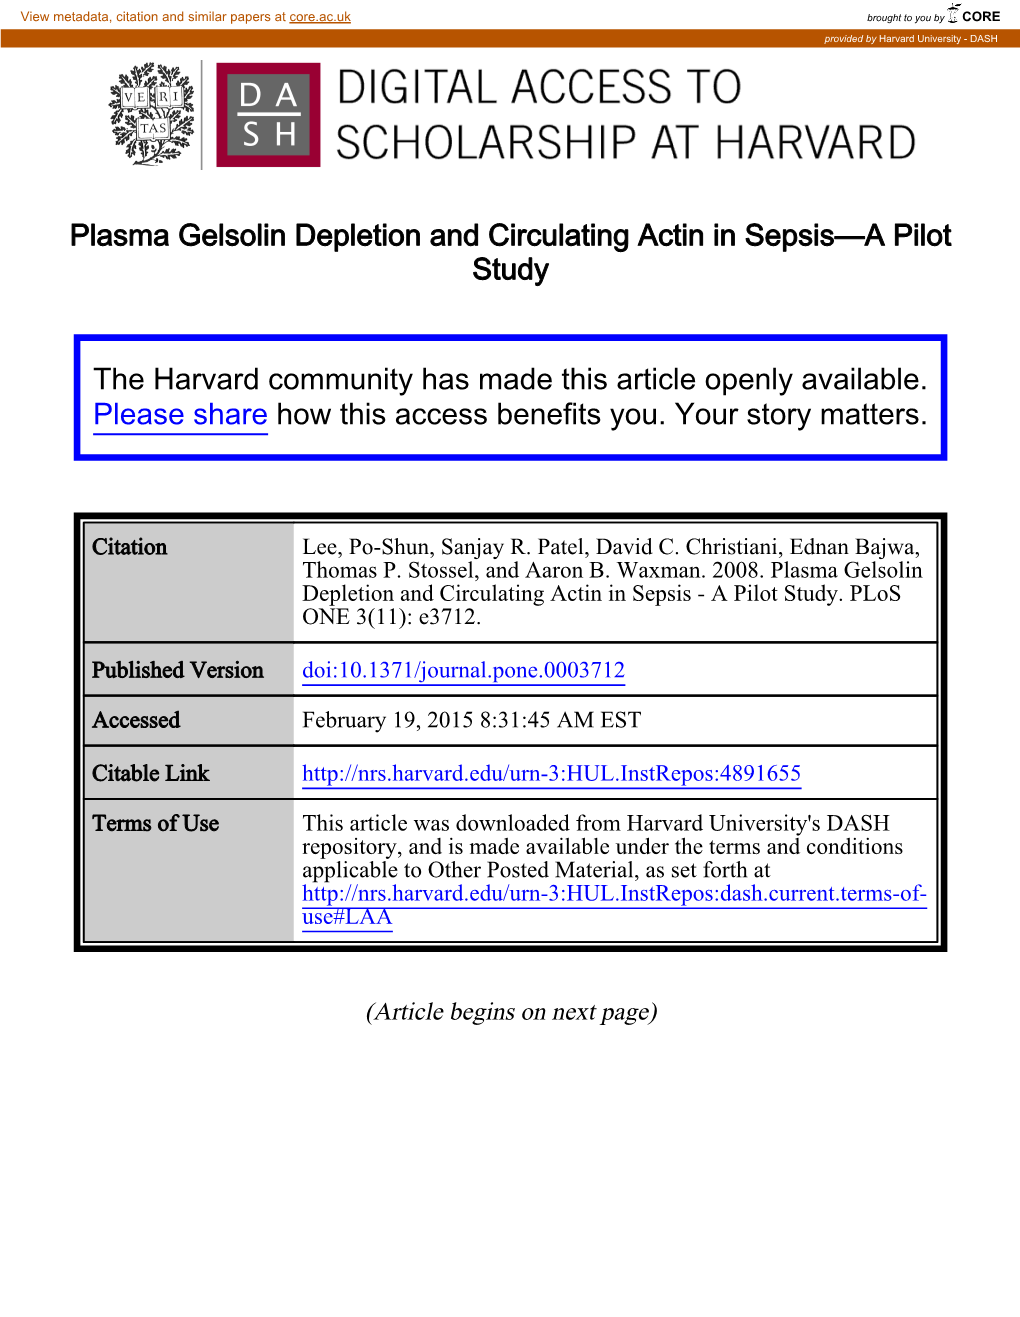 Plasma Gelsolin Depletion and Circulating Actin in Sepsis—A Pilot Study